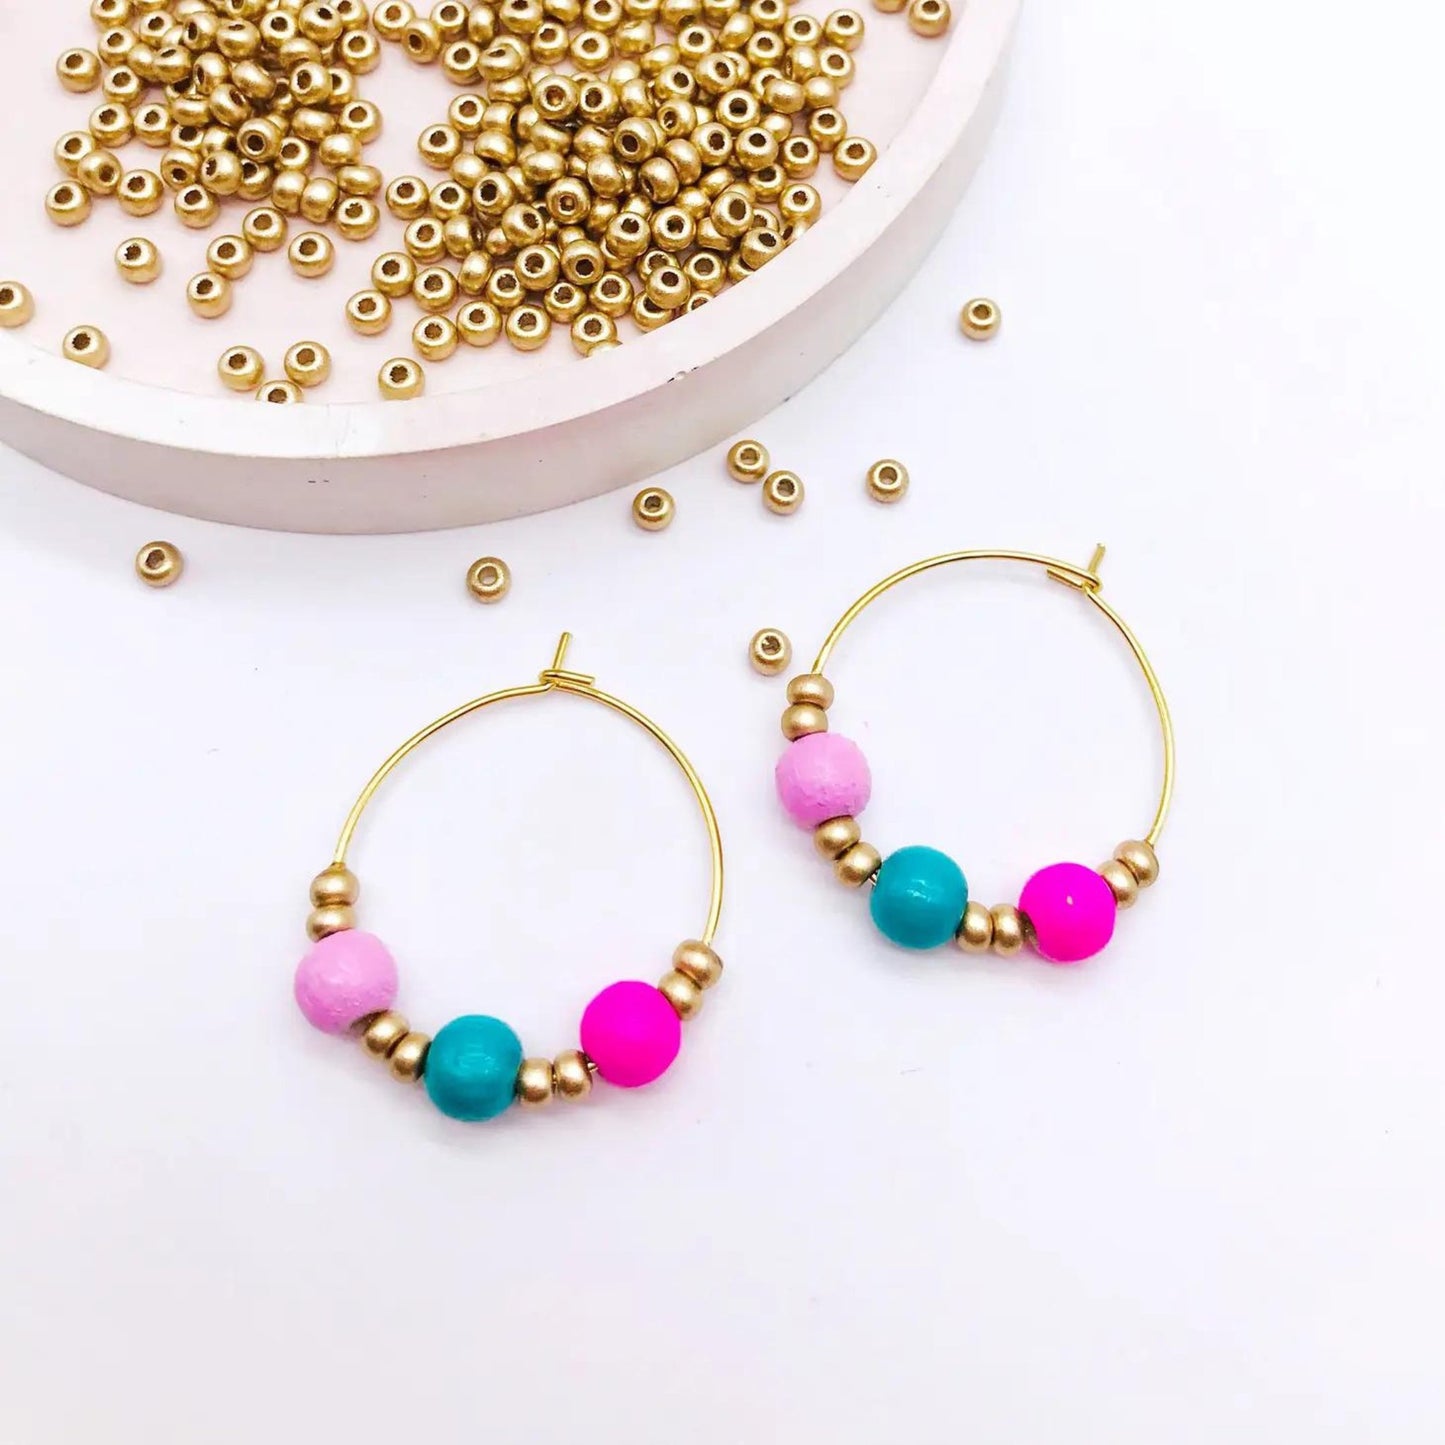 Neon Pink and Teal Beaded Hoops - The Little Jewellery Company